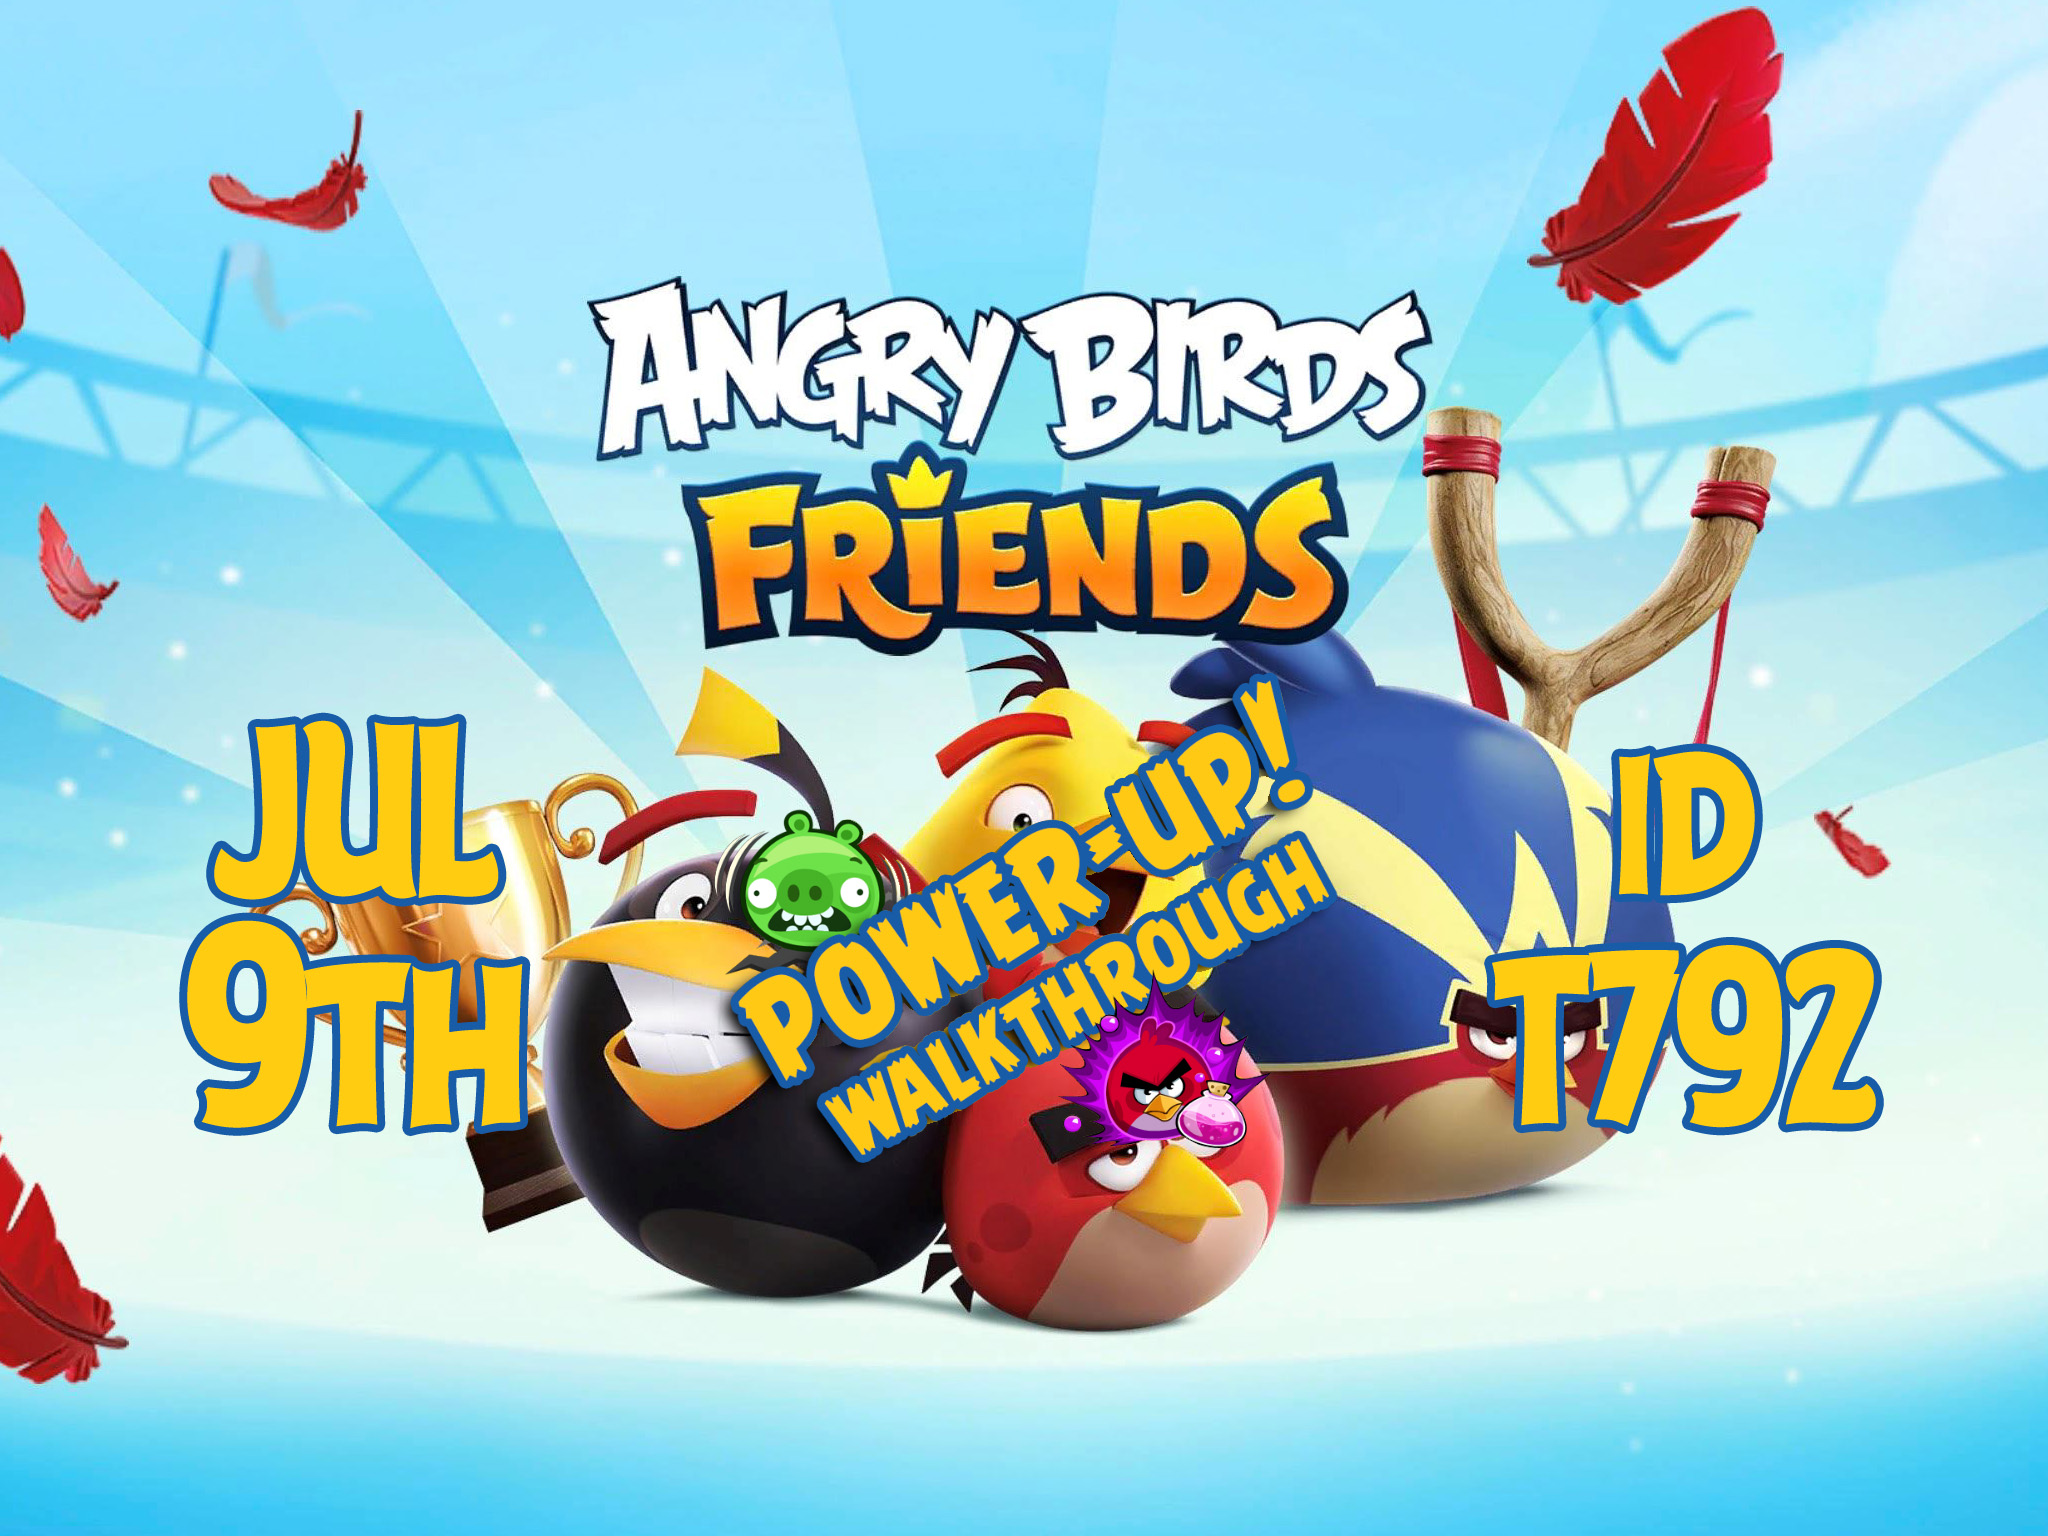 Angry-Birds-Friends-Tournament-T792-Feature-Image-PU